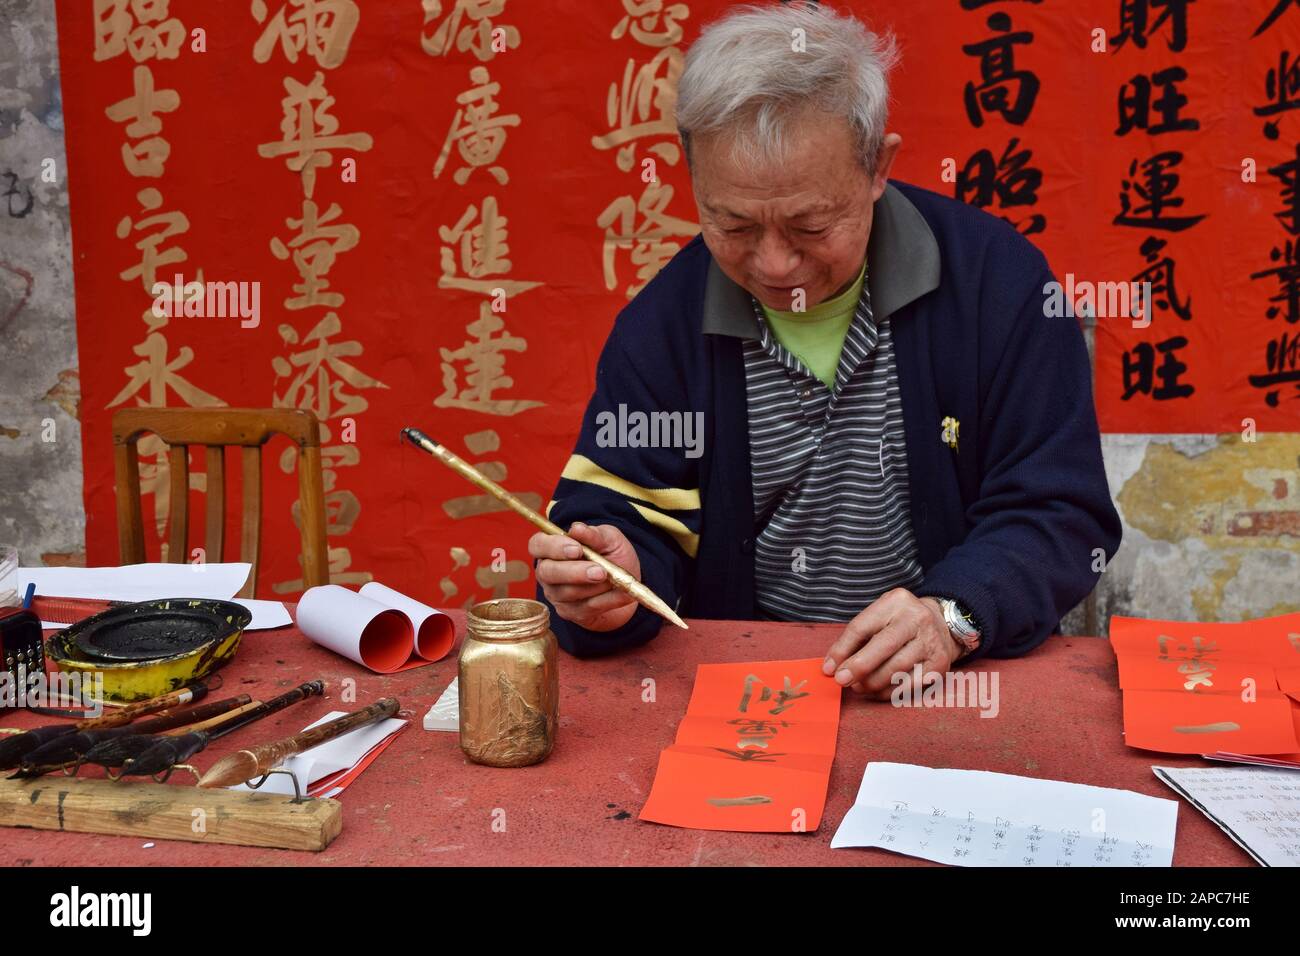 FOSHAN, CHINA - CIRCA JANUARY 2020: A man writing blessing couples during the Spring Festival. A translation of couplets is Happy and prosperious year Stock Photo